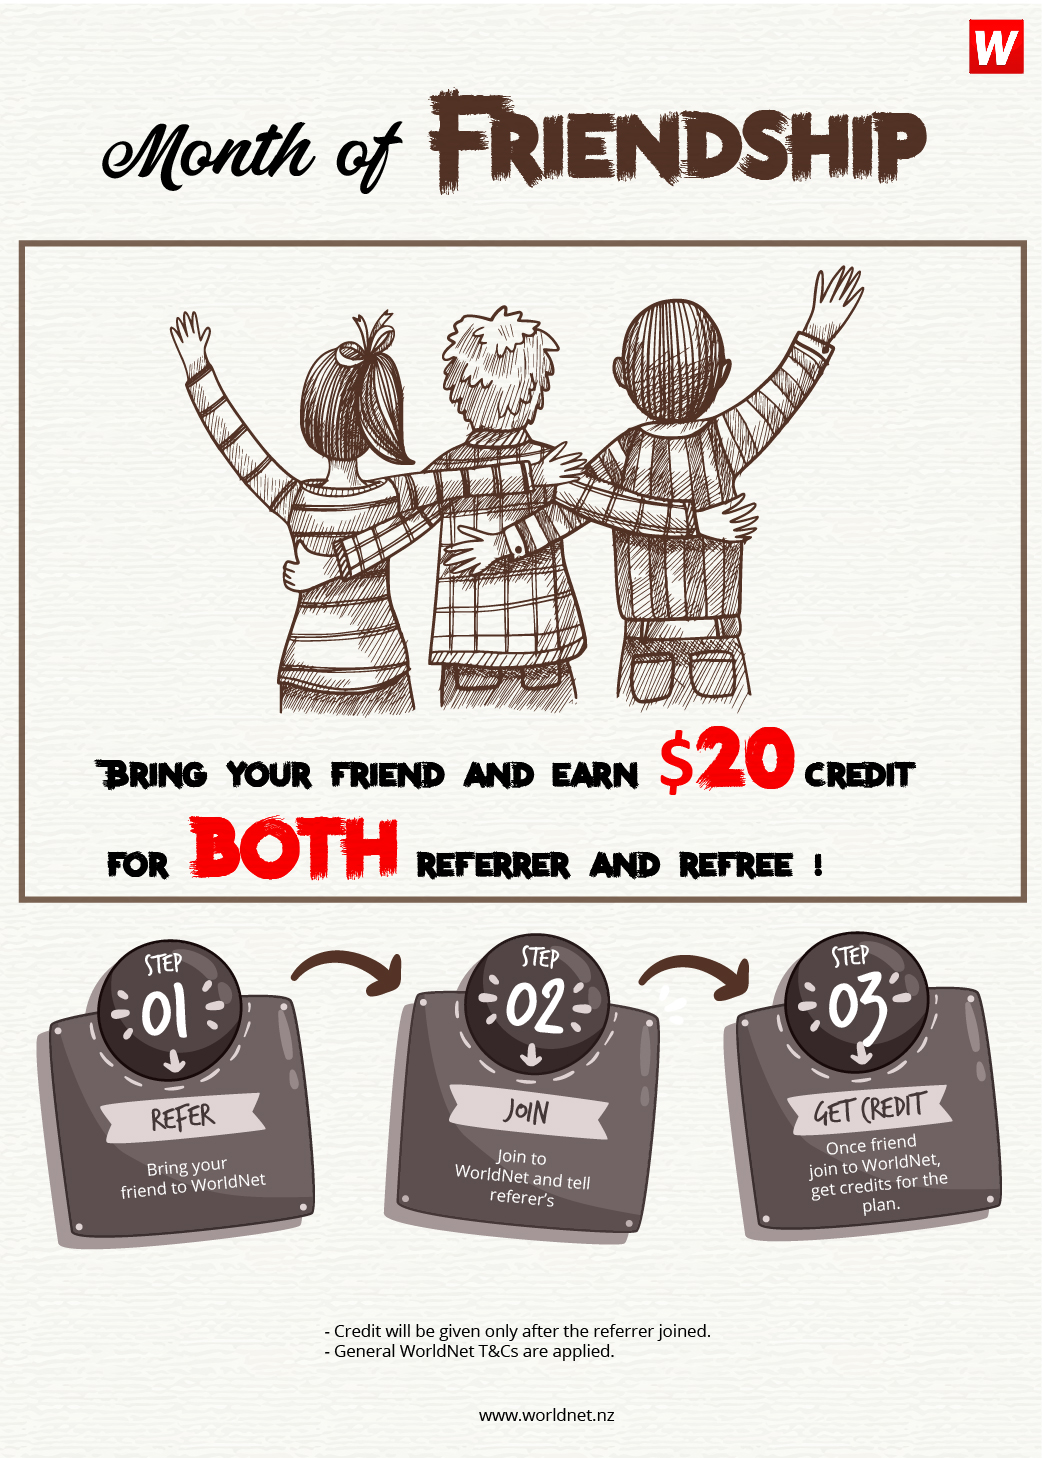 Bring Your Friend and Get max $30 CREDIT!!